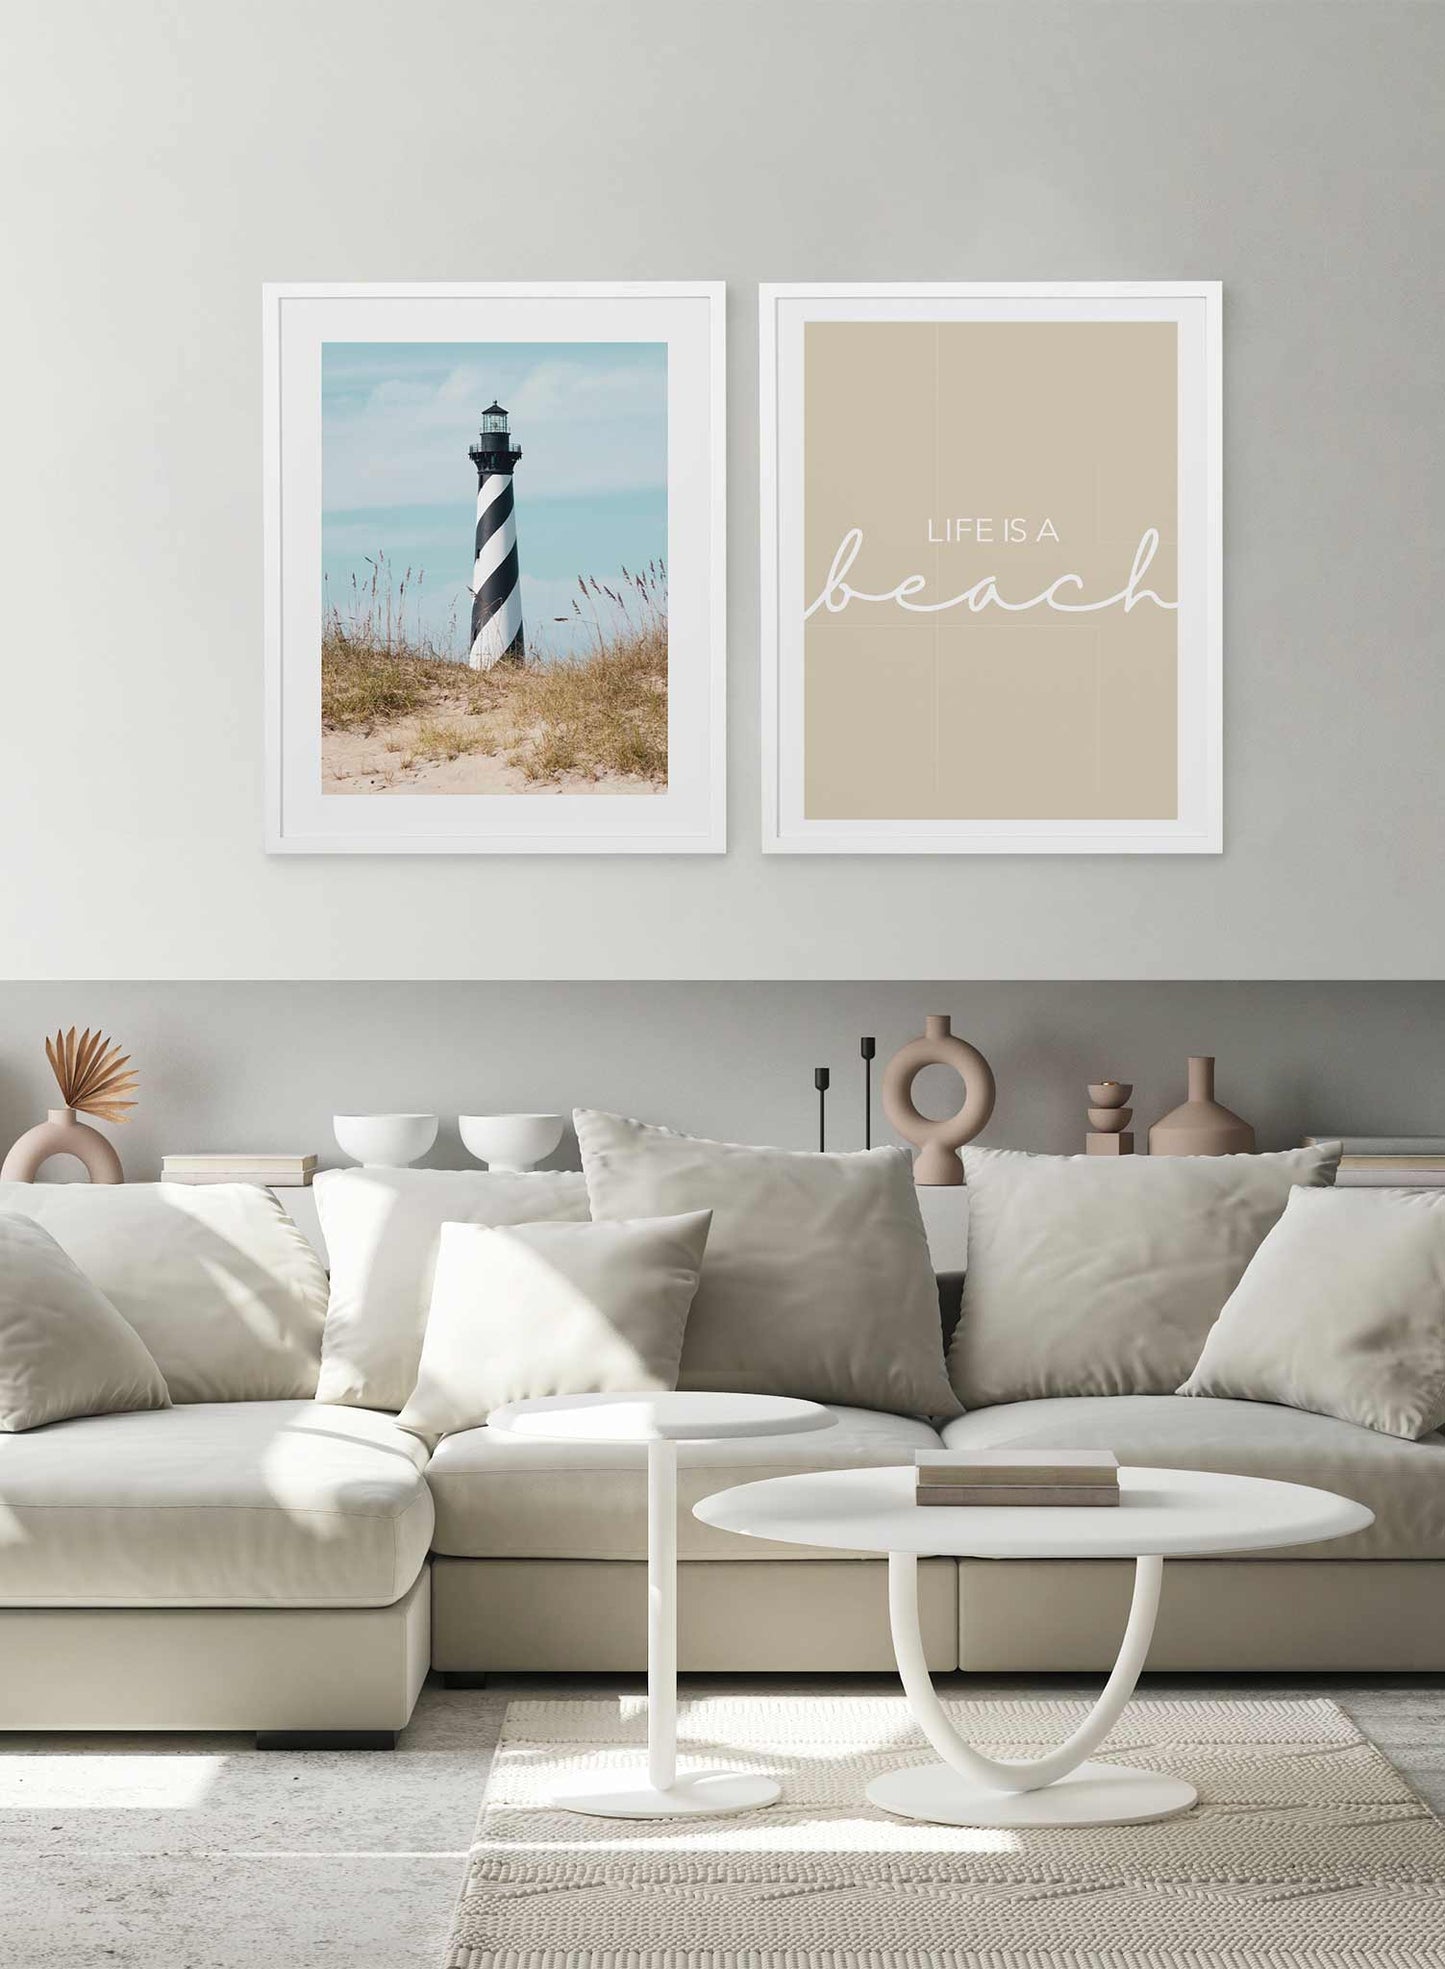 Striped Watchtower is a minimalist photography of a sandy pathway covered in beach grass leading to a swirled black and white tall lighthouse by Opposite Wall.